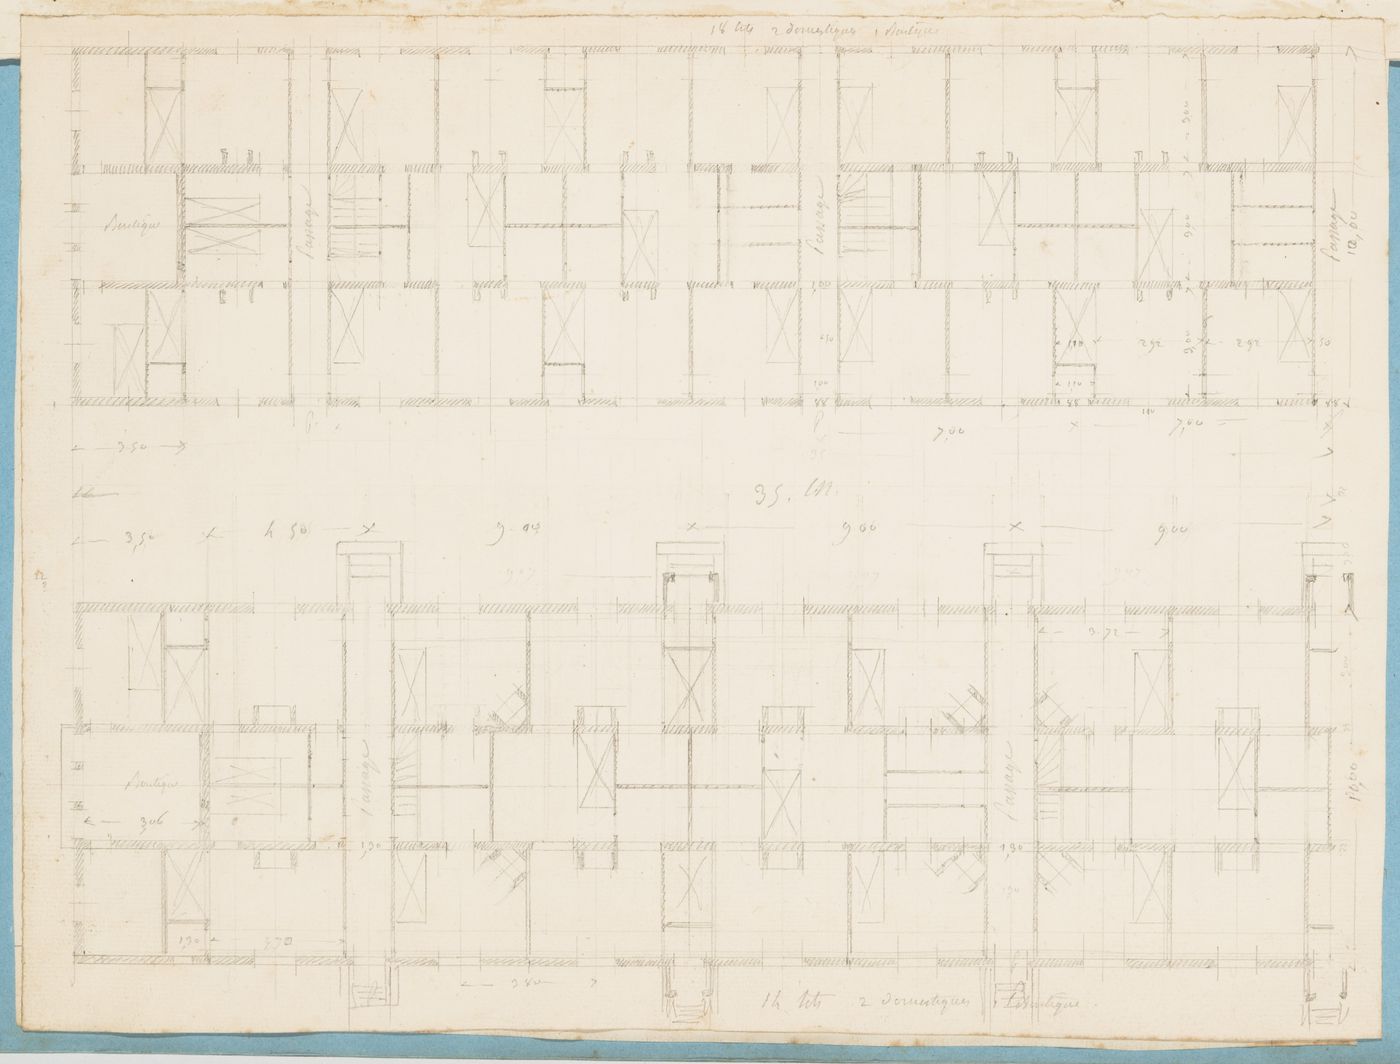 Project for housing for M. Busche: Partial plans for row houses